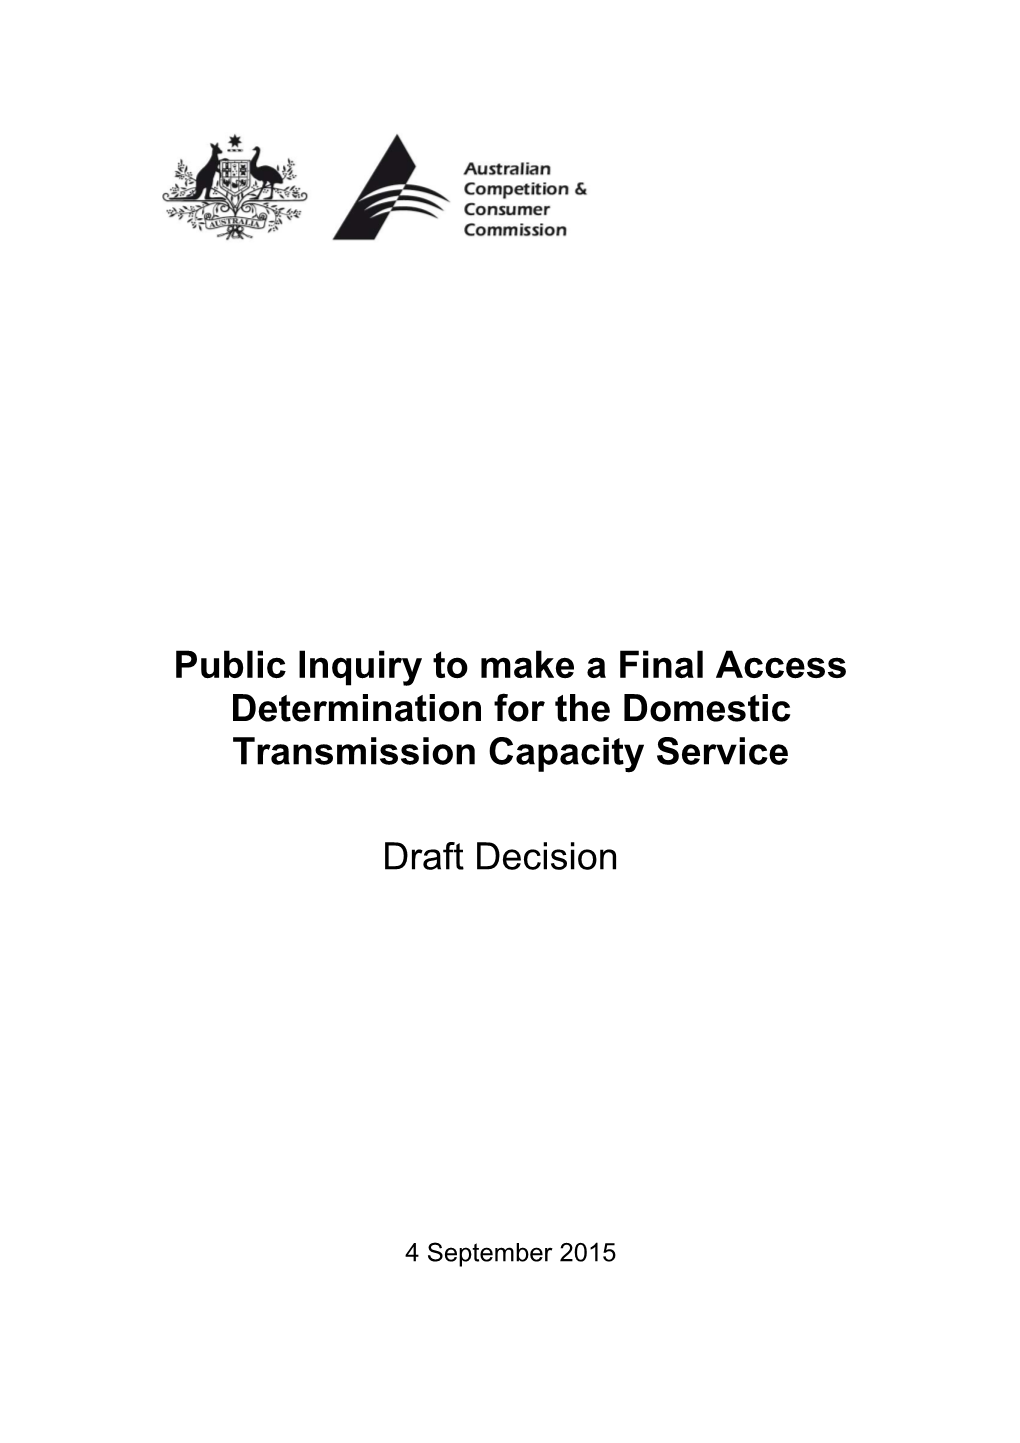 Public Inquiry to Make a Final Access Determination for the Domestic Transmission Capacity